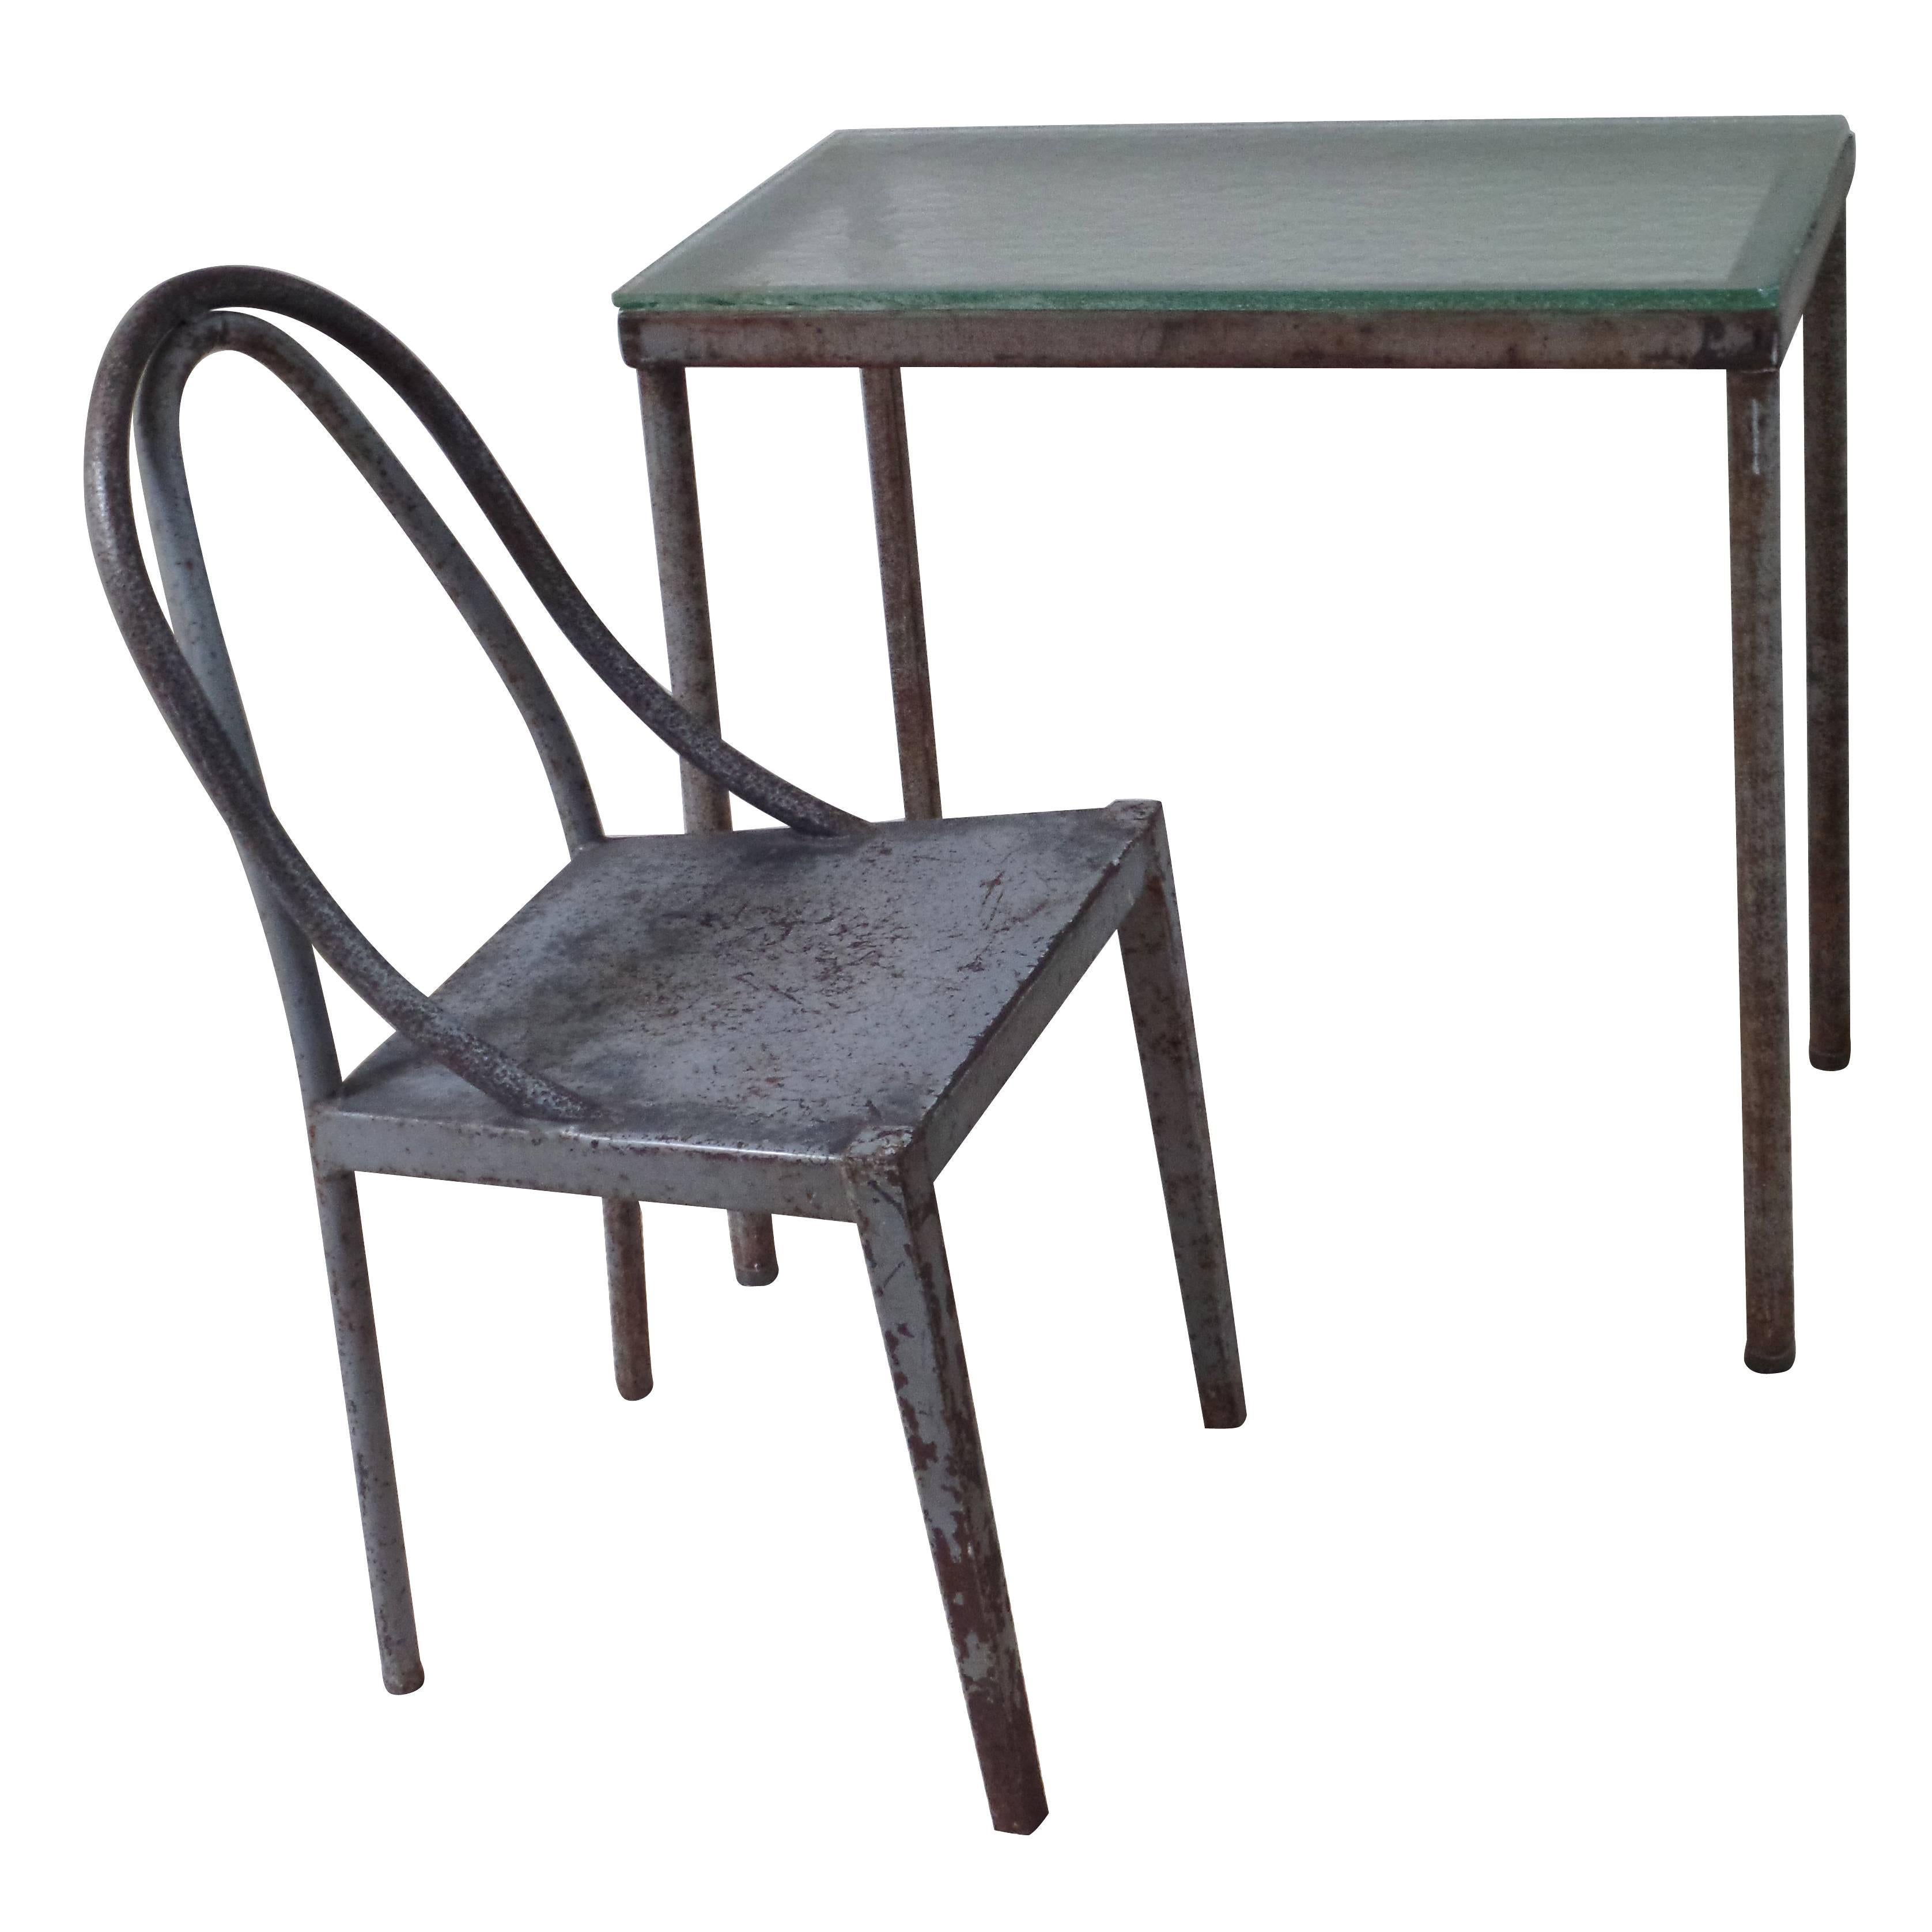 Important Modernist Prototype Desk & Chair by U.A.M. Attributed to Le Corbusier